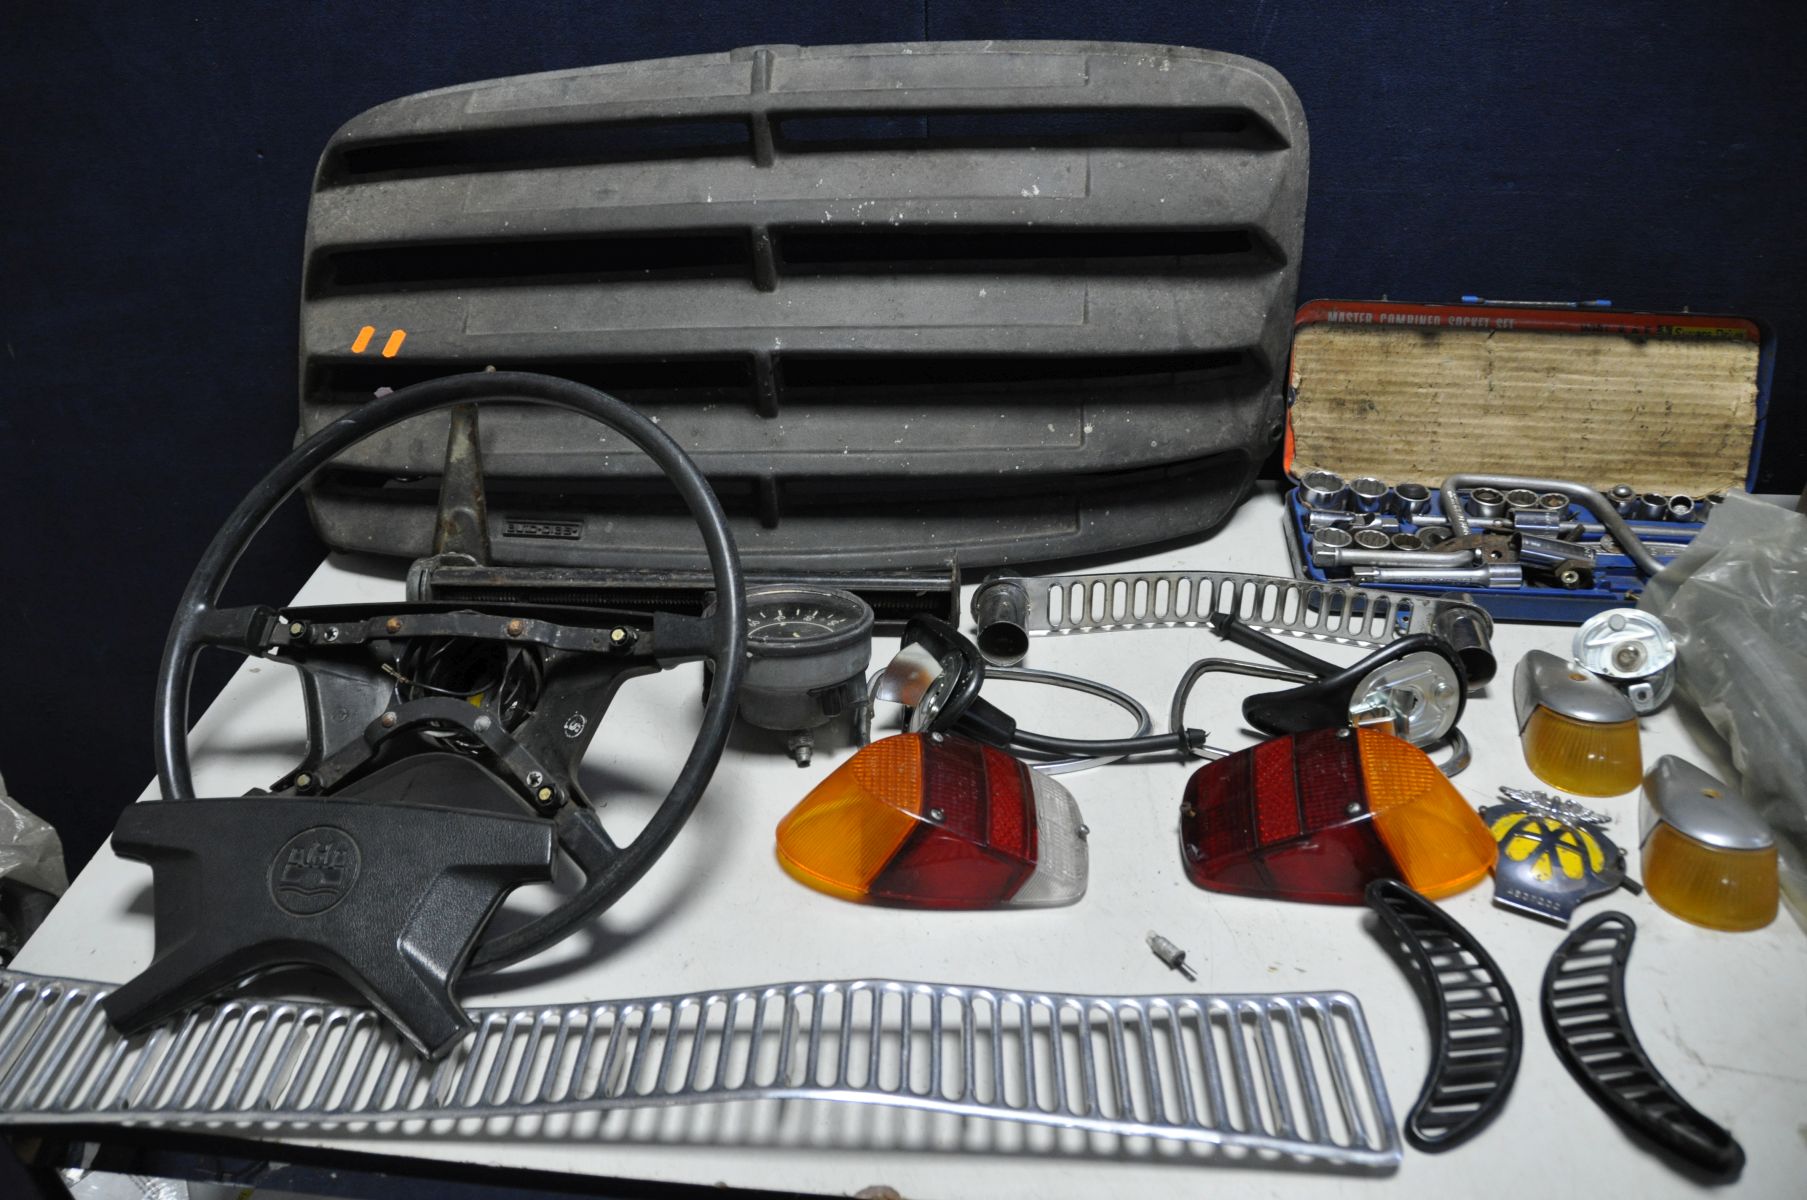 A COLLECTION OF VINTAGE CAR PARTS AND TOOLS, possibly from a Volkswagen Beetle along with partial - Image 2 of 3